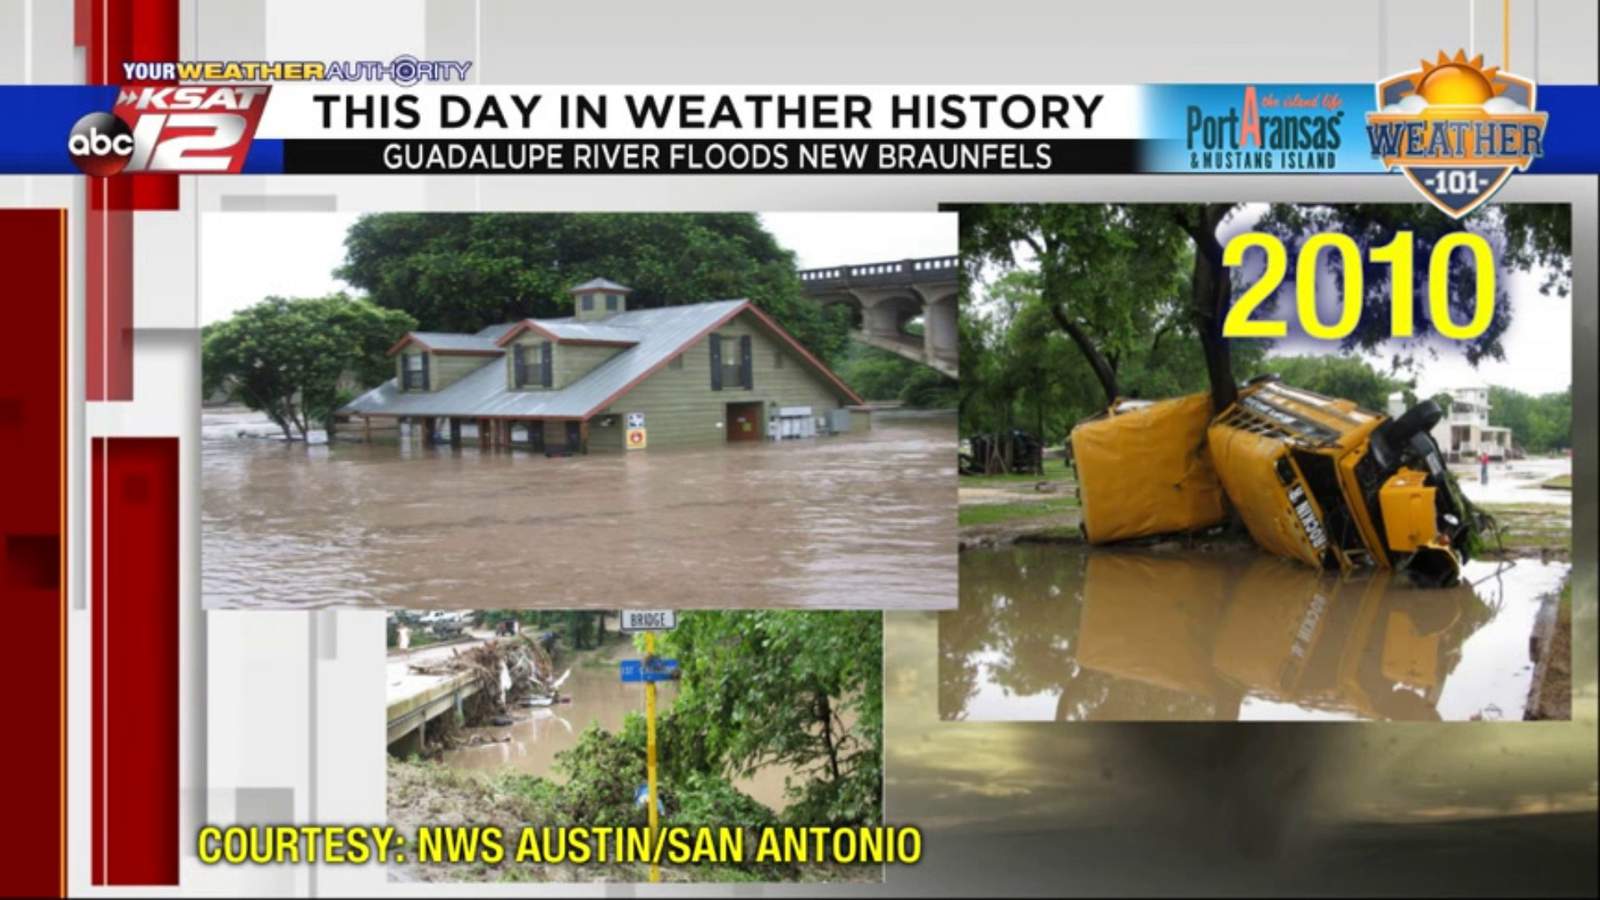 This Day in Weather History: June 10th